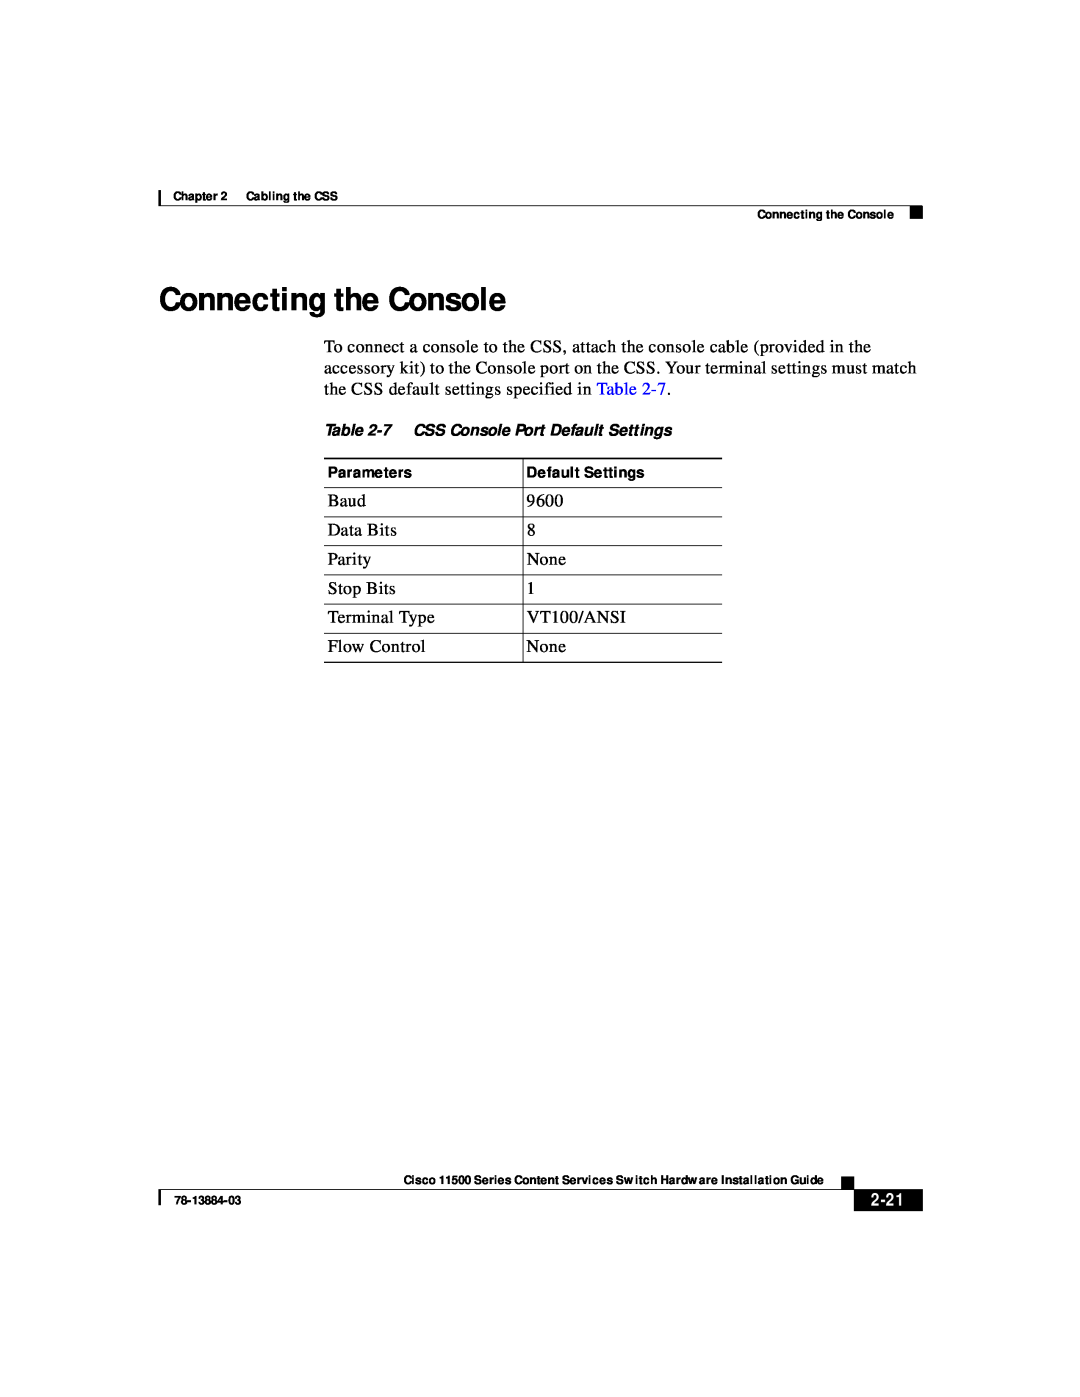 Cisco Systems 11500 Series manual Connecting the Console, Parameters, Default Settings, 2-21 